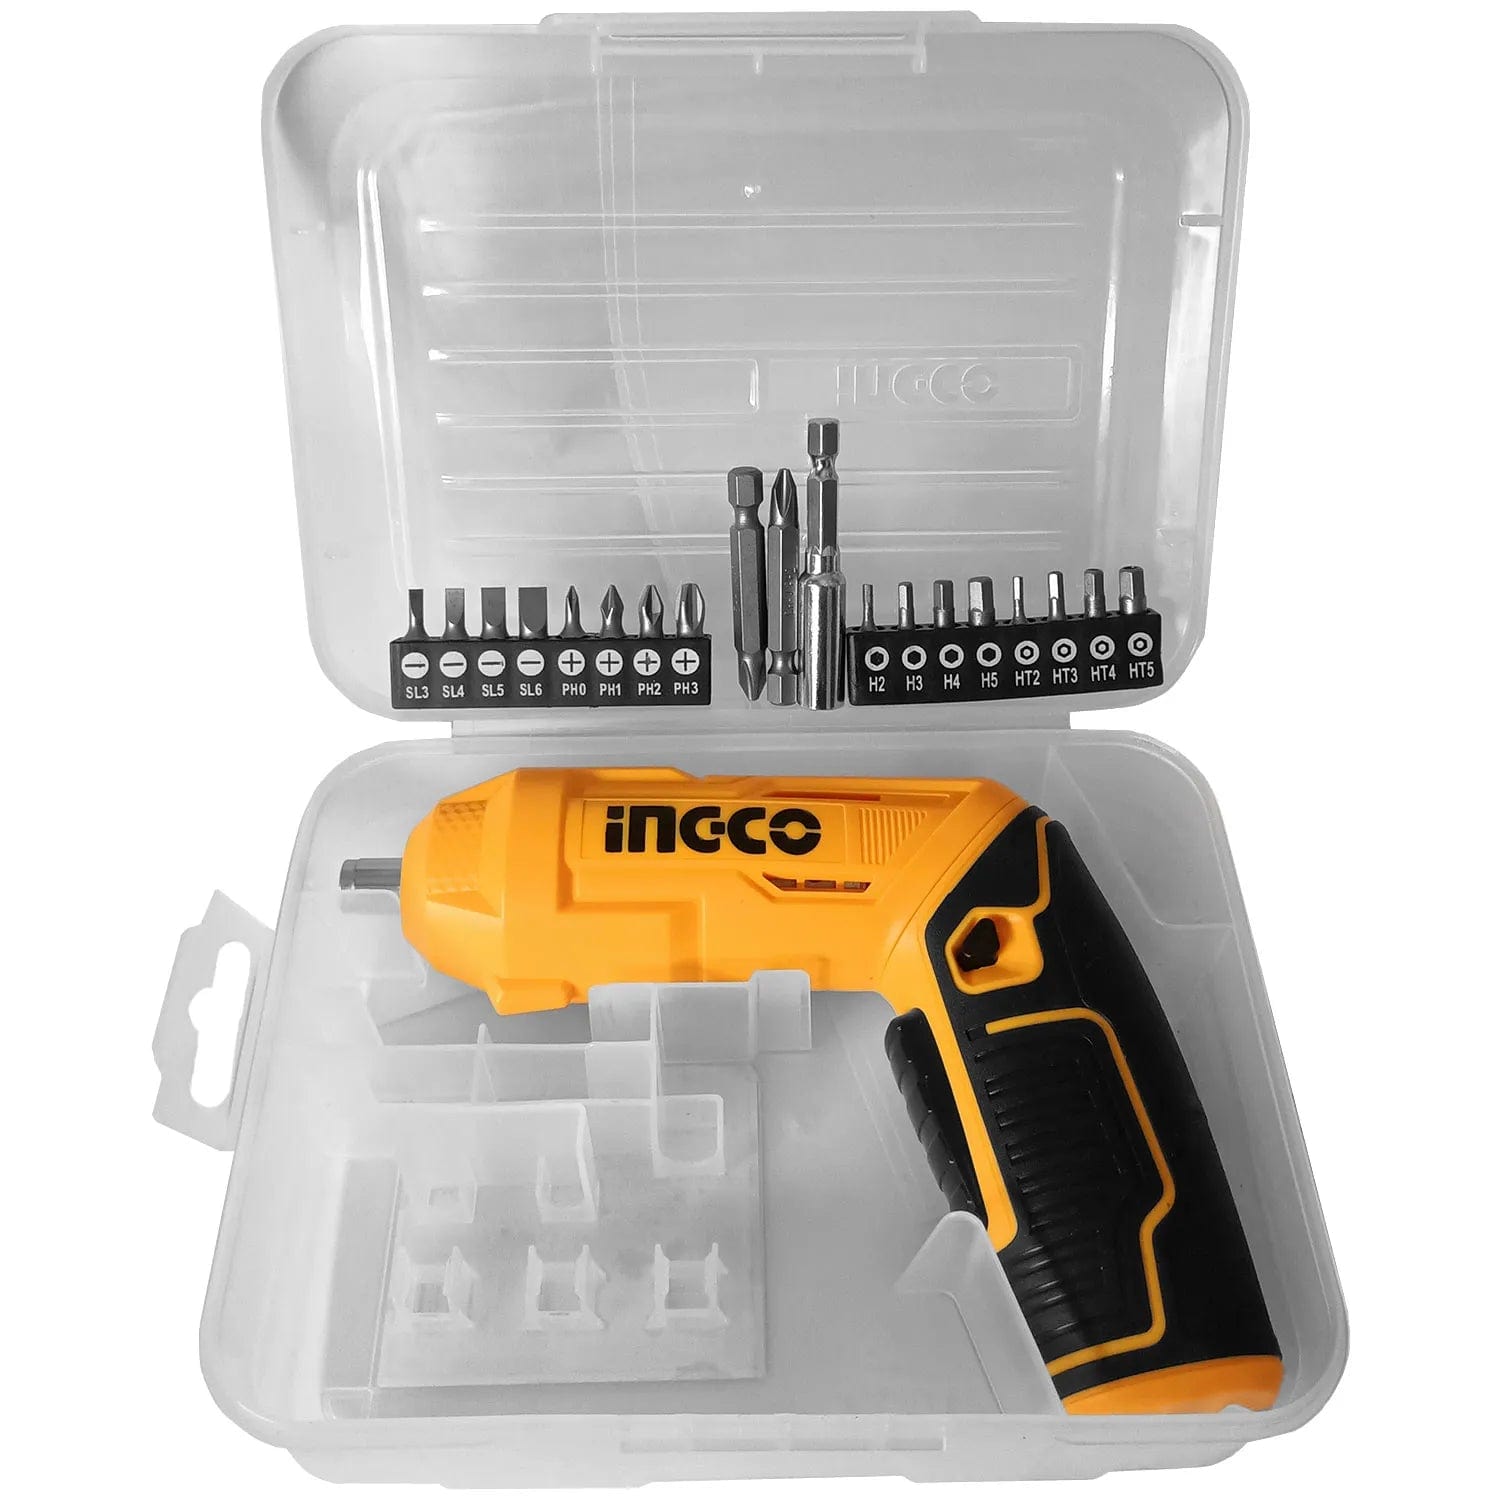 Ingco Lithium-Ion Cordless Screwdriver 4V - CSDLI0442 | Supply Master Accra, Ghana Powered Screwdriver Buy Tools hardware Building materials